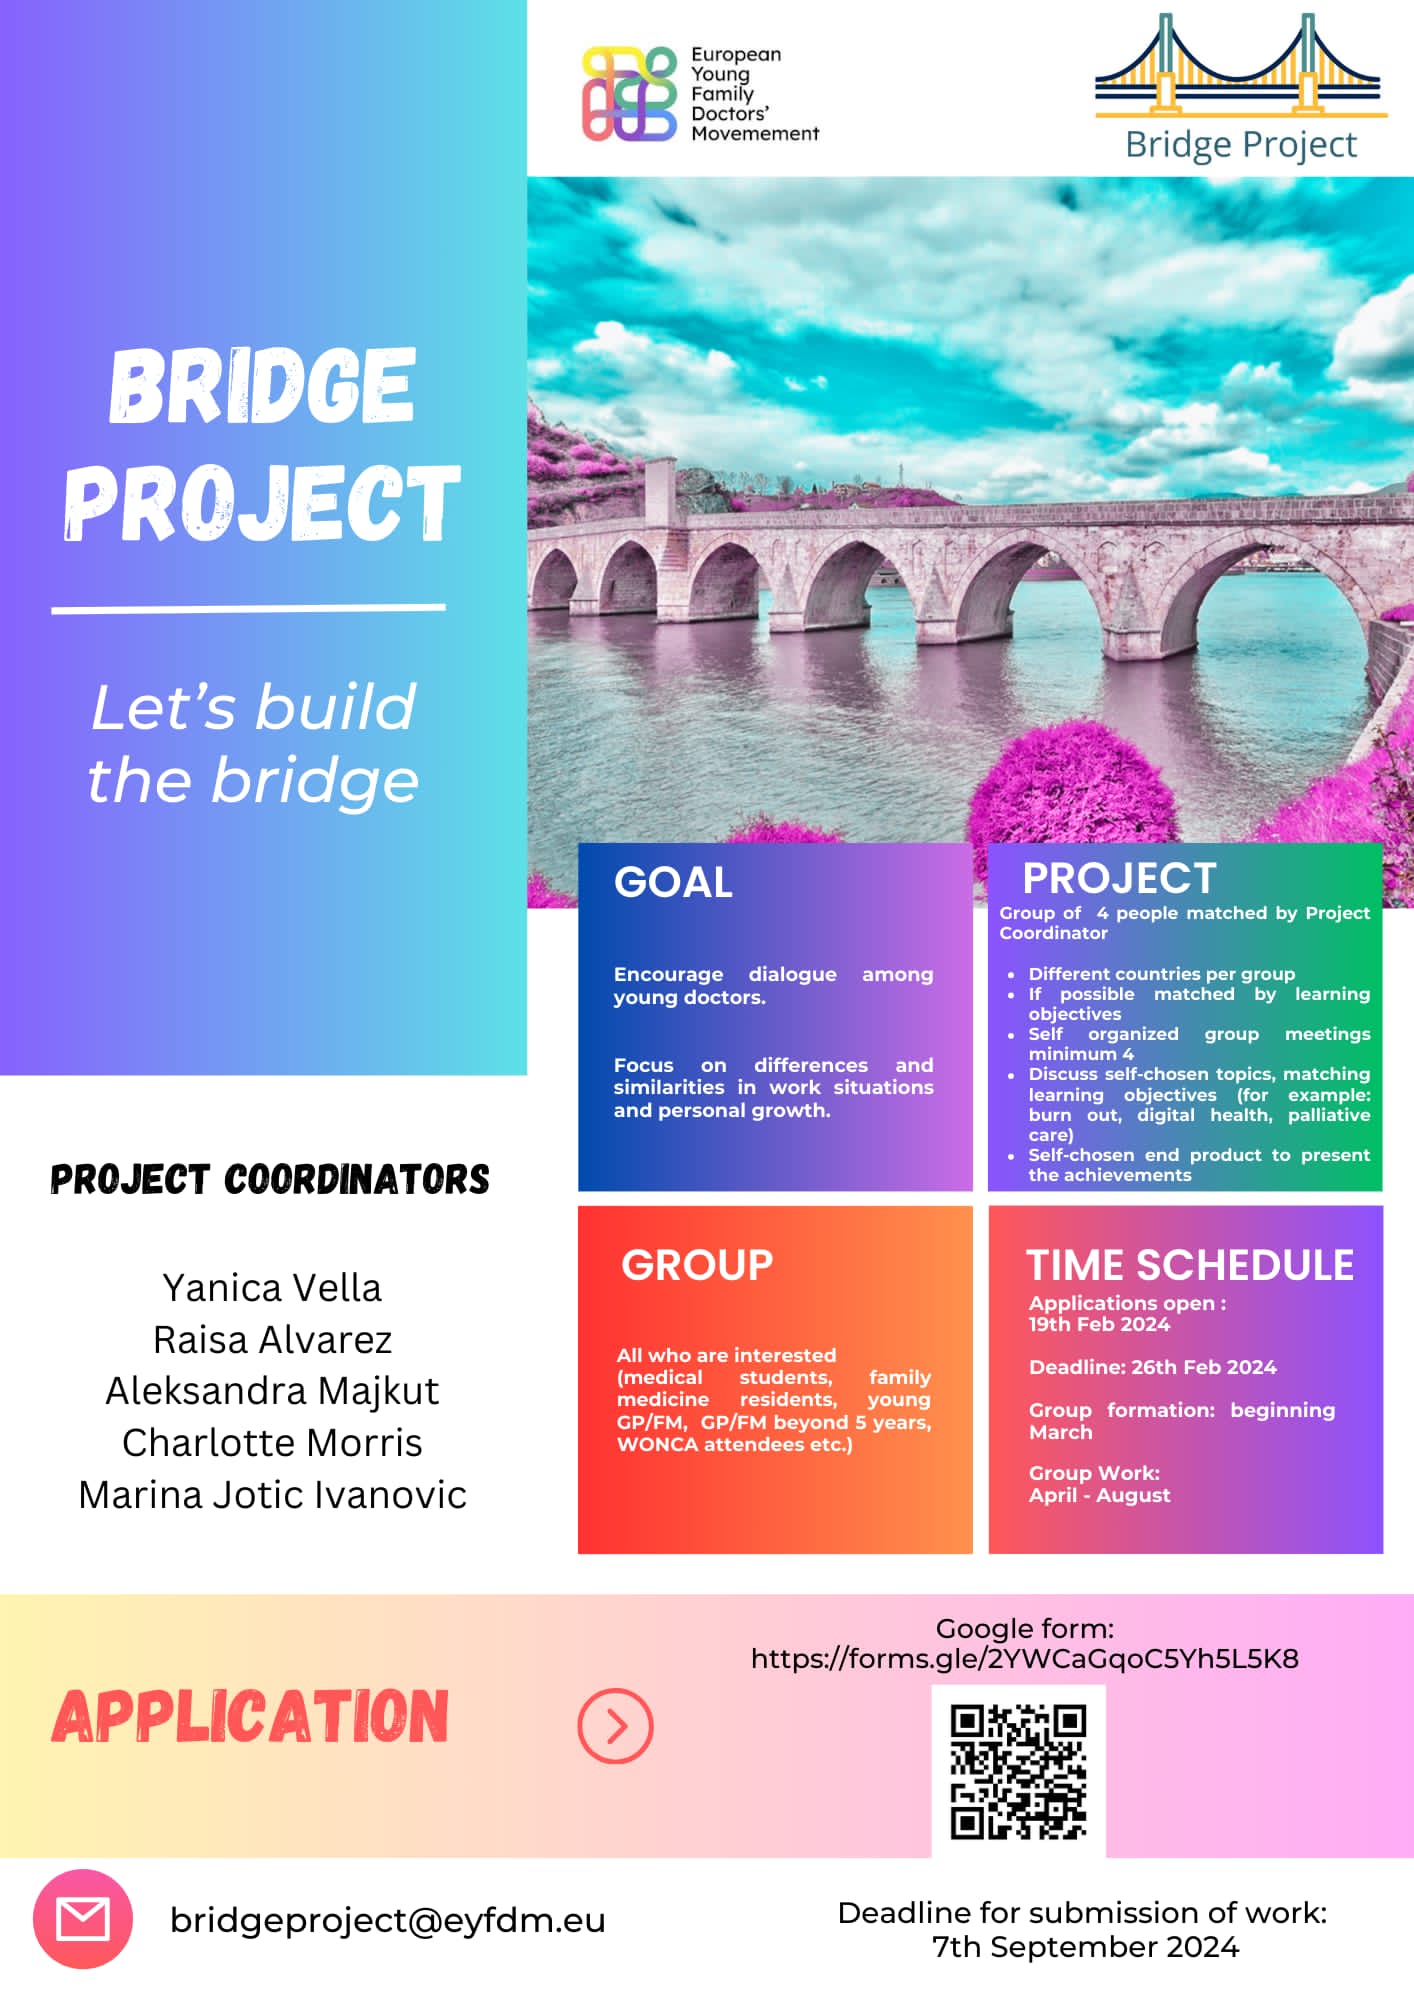 The Bridge Project – 3 days left to apply